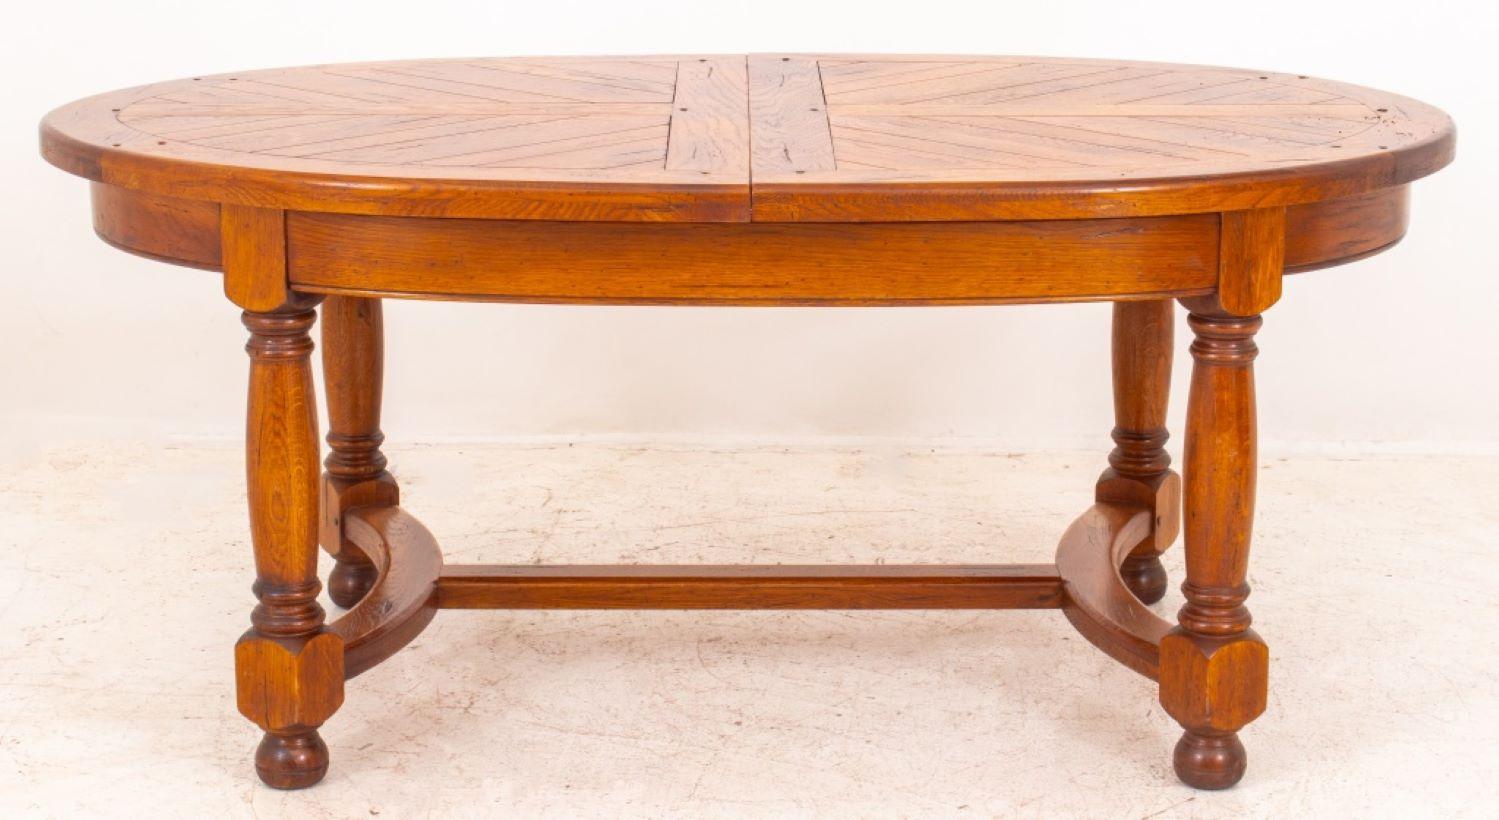 French Louis XIII style oak parquetry extending oval dining table raised on turned legs joined by stretchers, two leaves. Measures: Without extension: 30.5